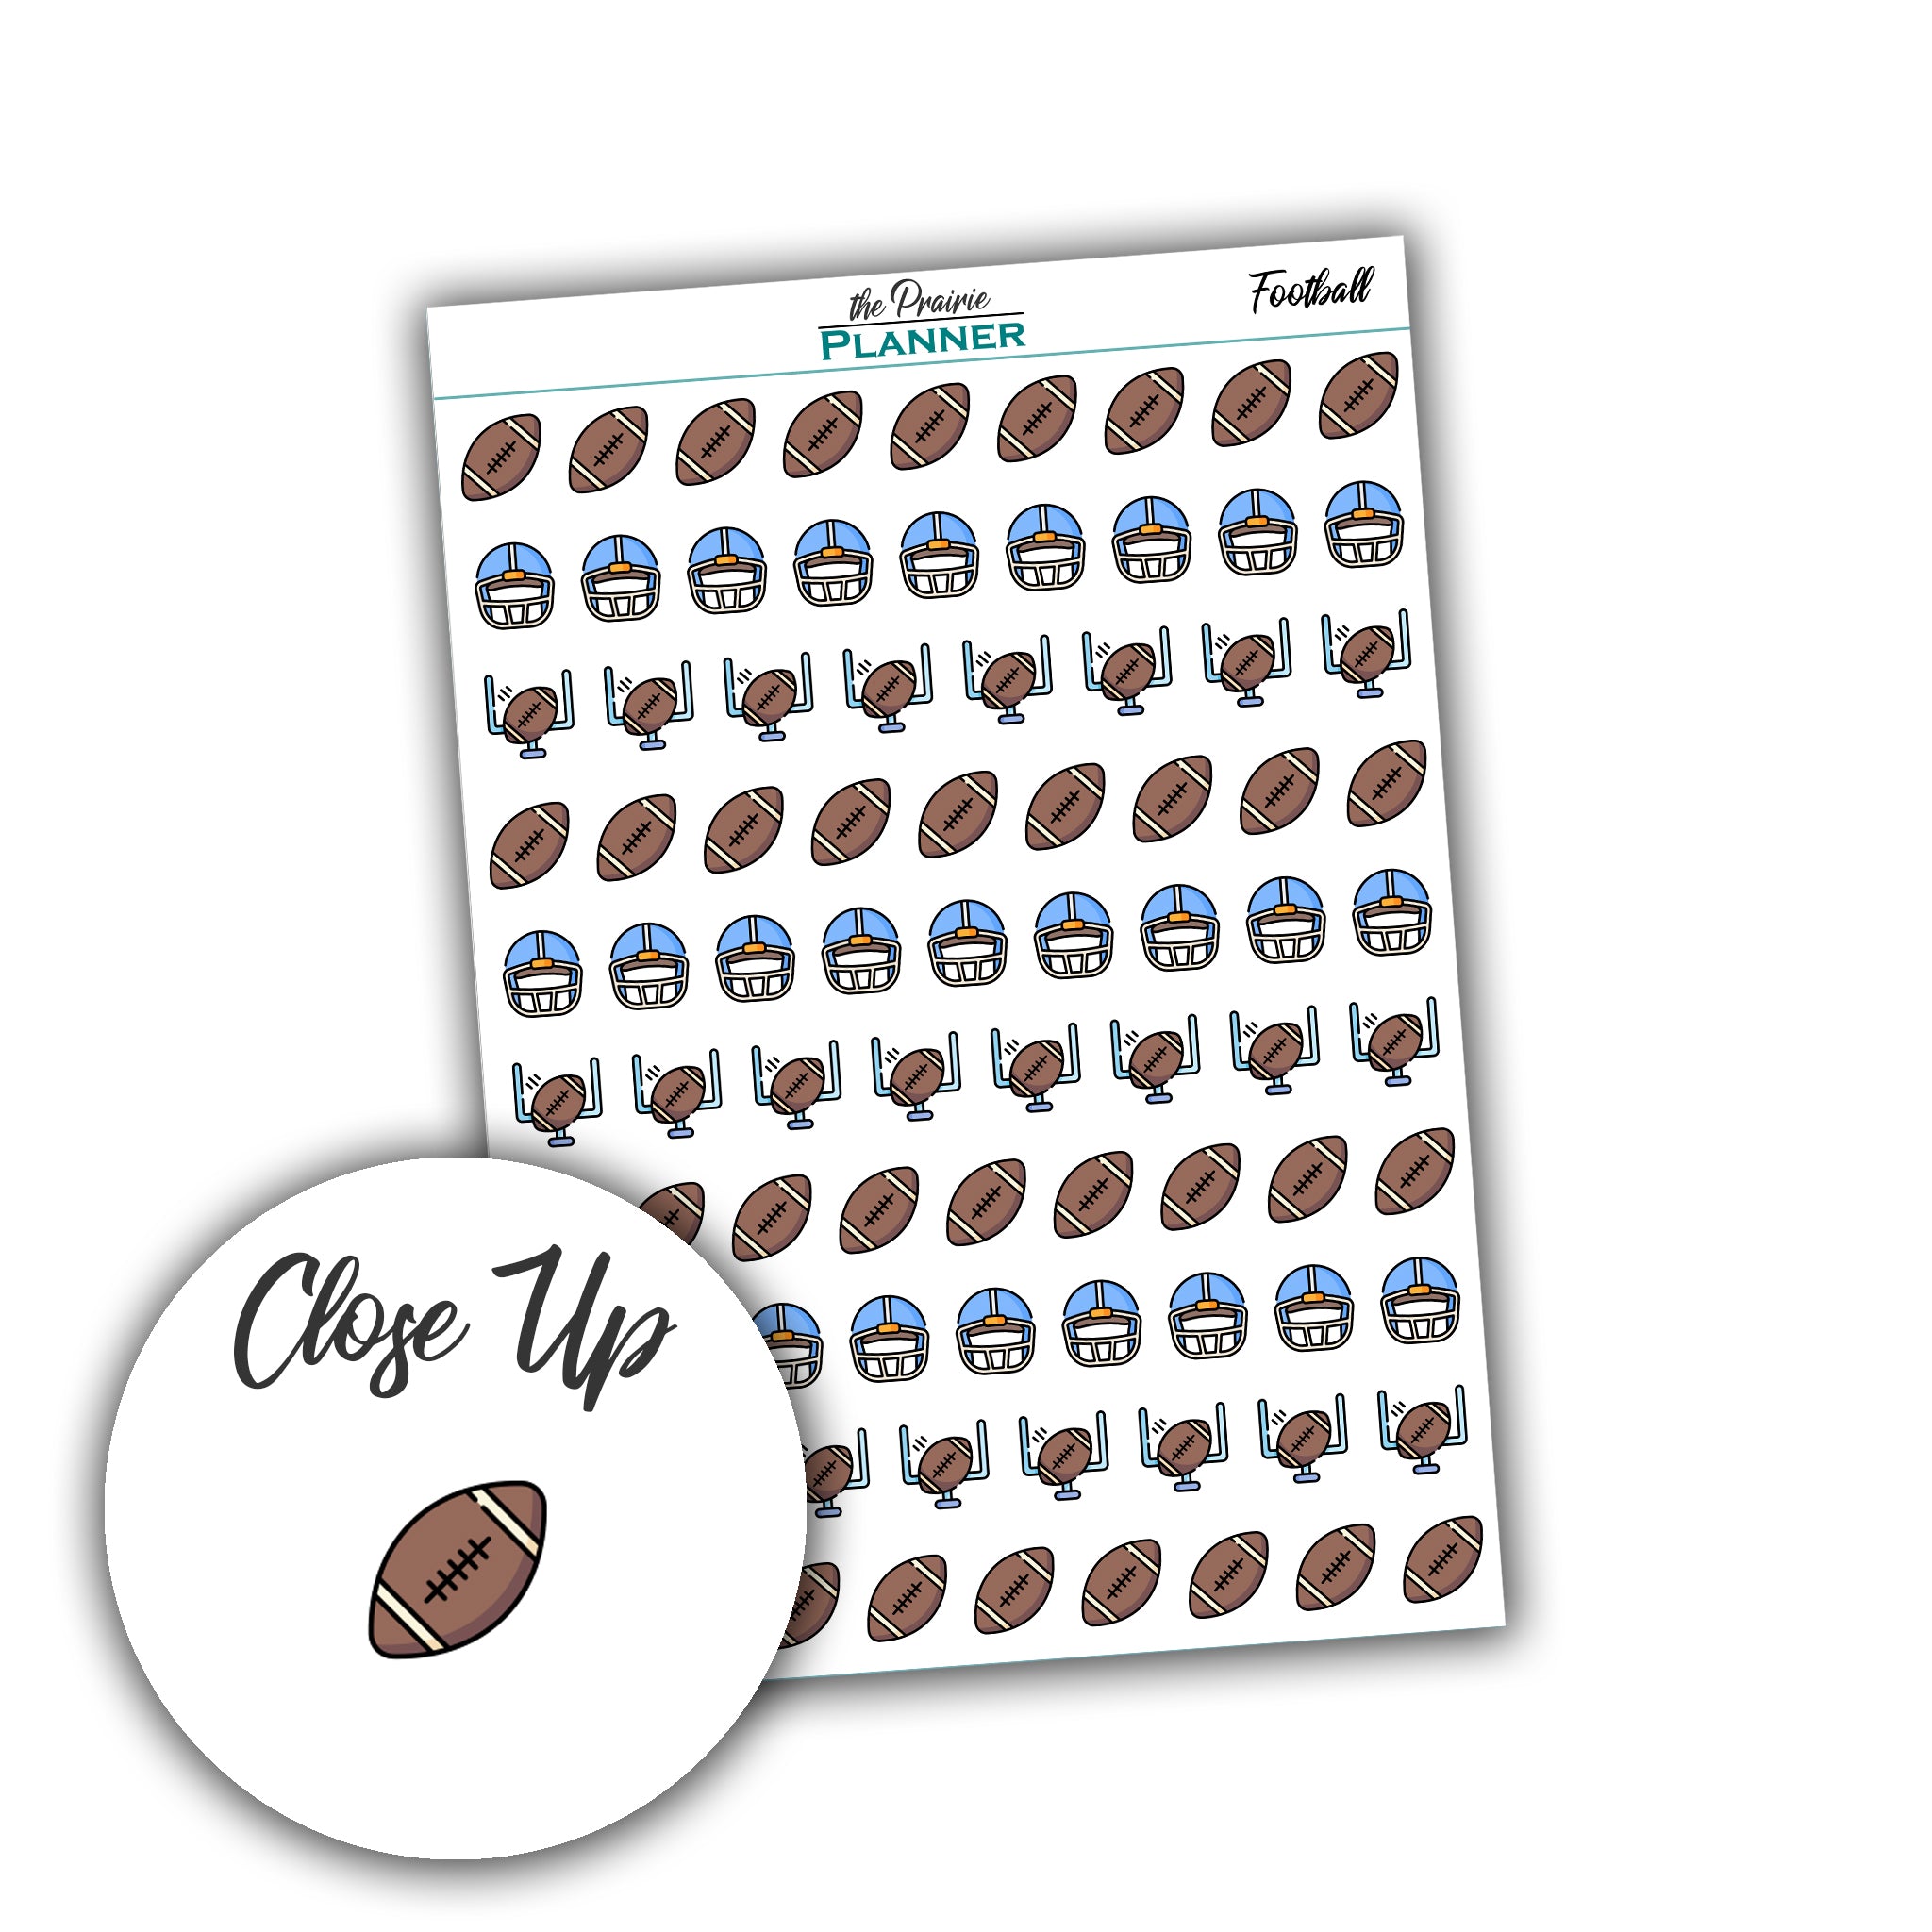 Football Practice/Game - Planner Stickers